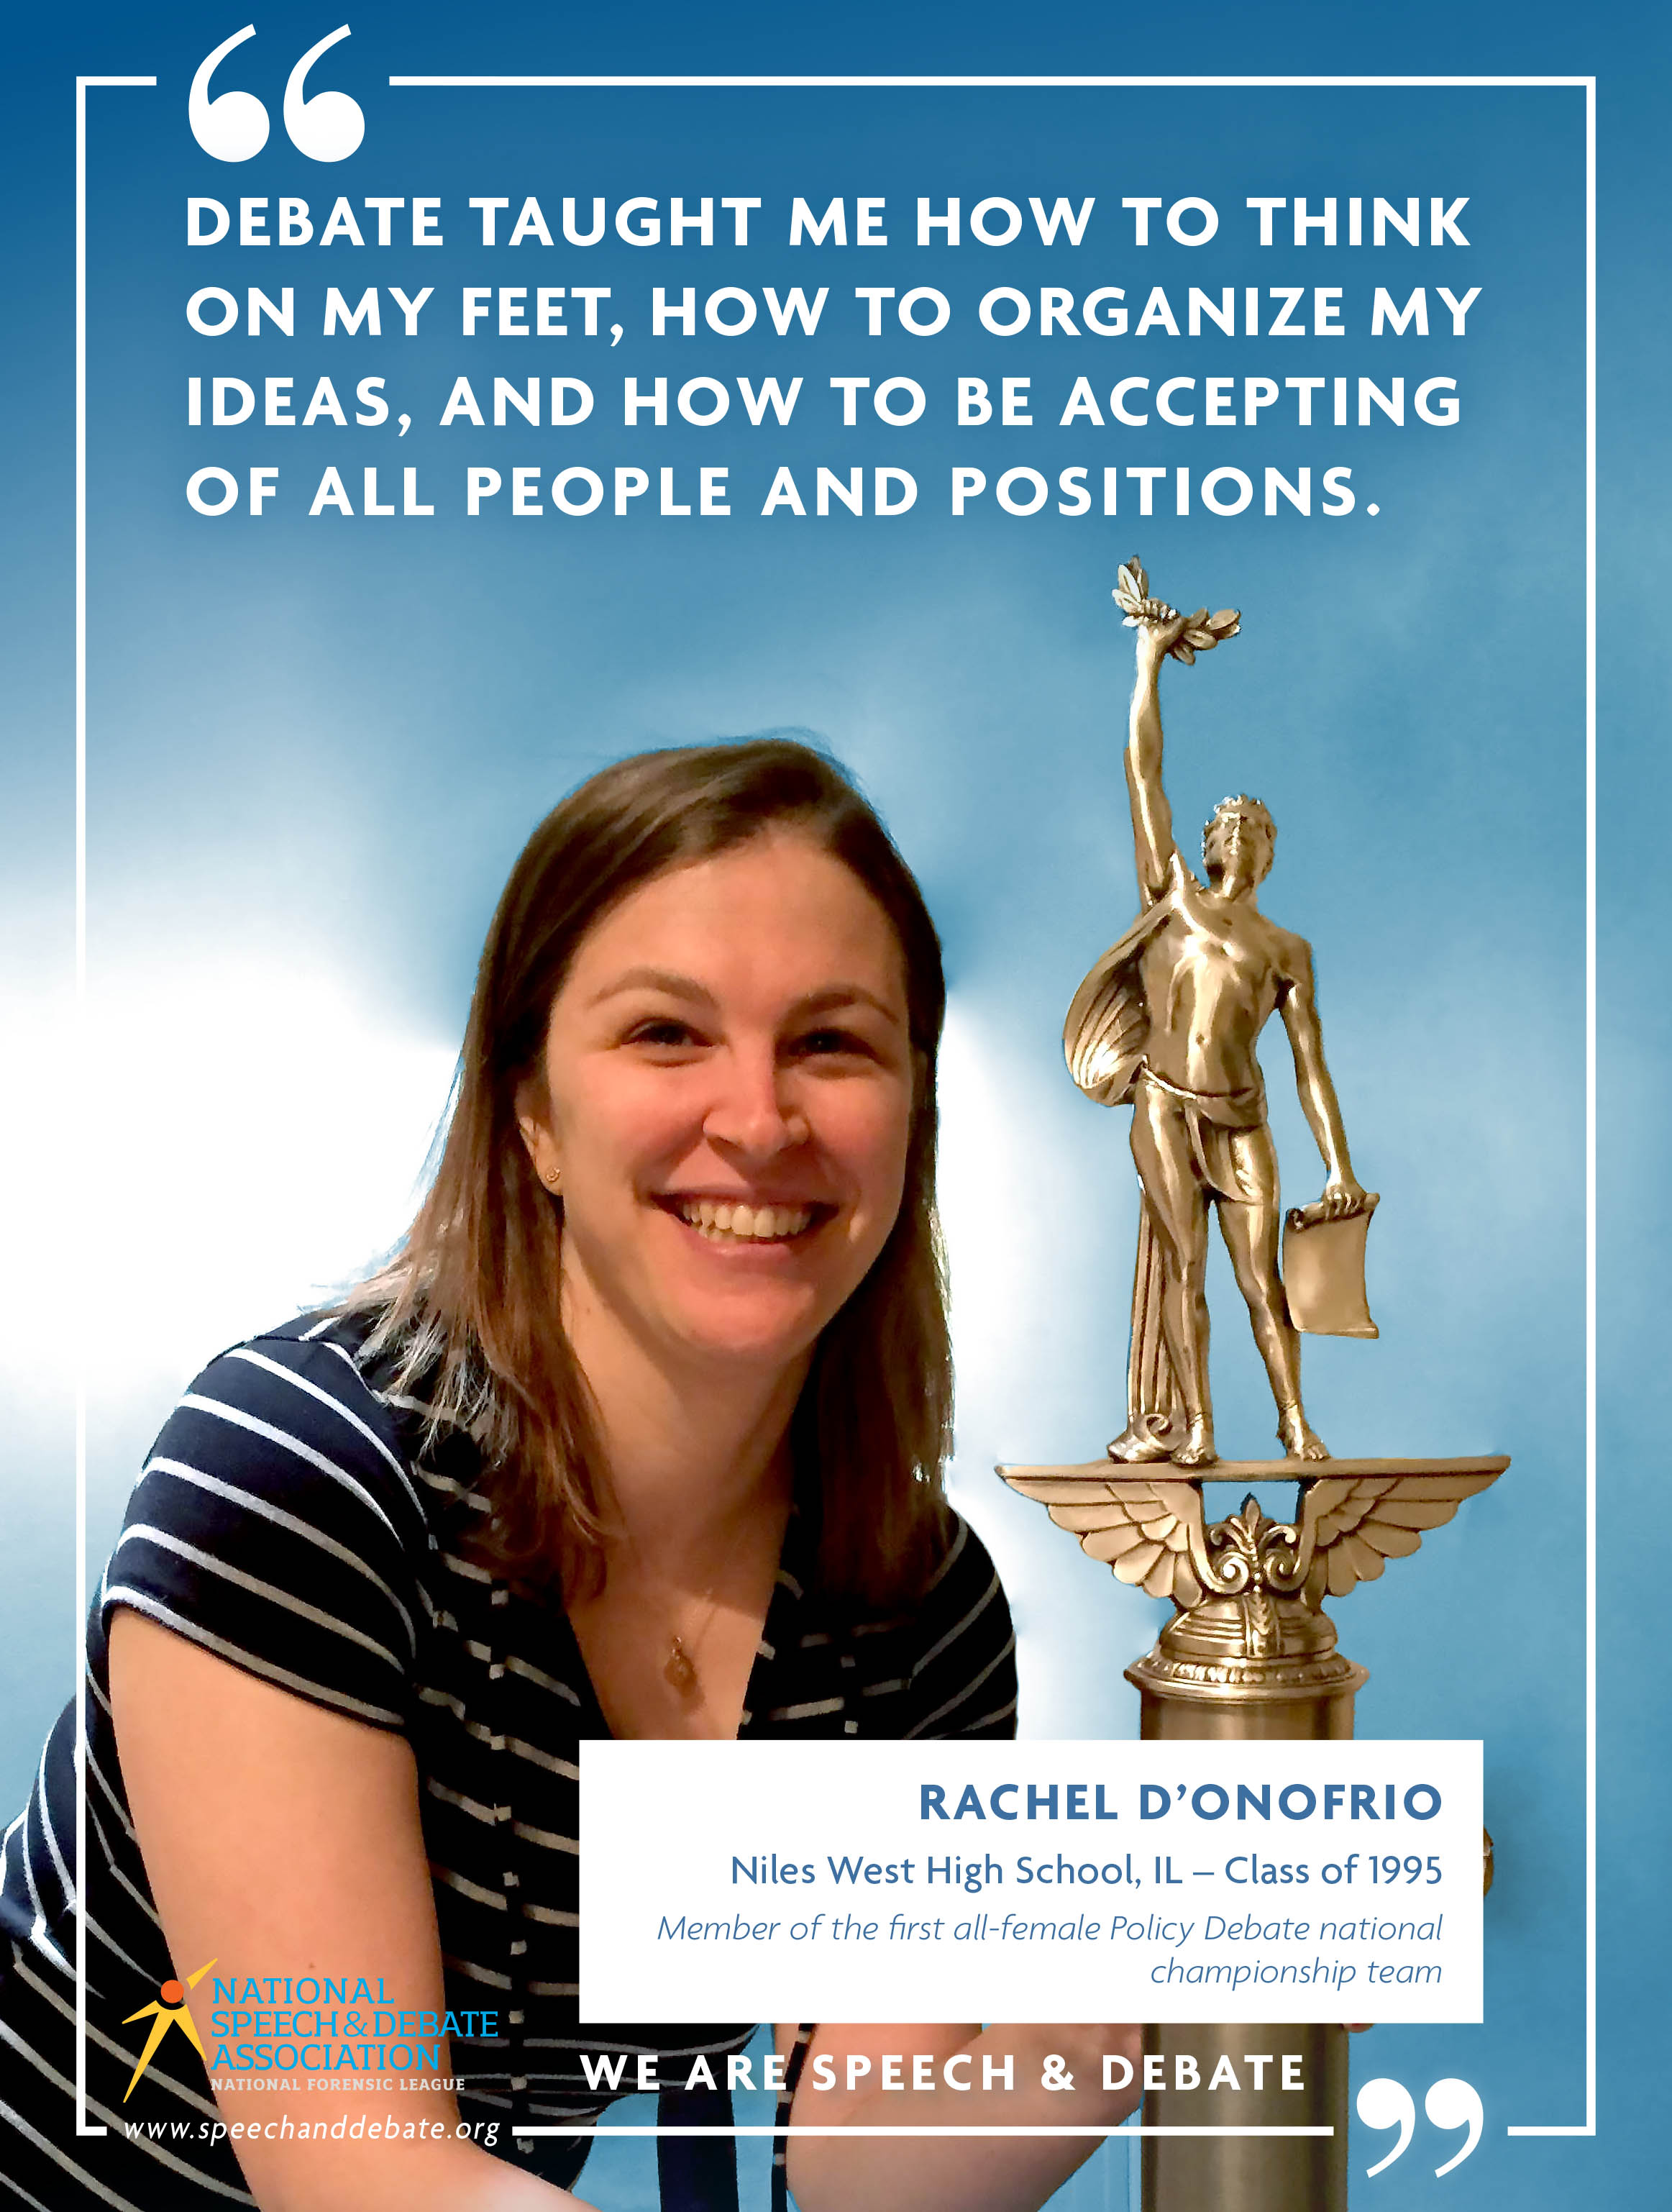 "DEBATE TAUGHT ME HOW TO THINK ON MY FEET, HOW TO ORGANIZE MY IDEAS, AND HOW TO BE ACCEPTING OF ALL PEOPLE AND POSITIONS." - Rachel D'Onofrio